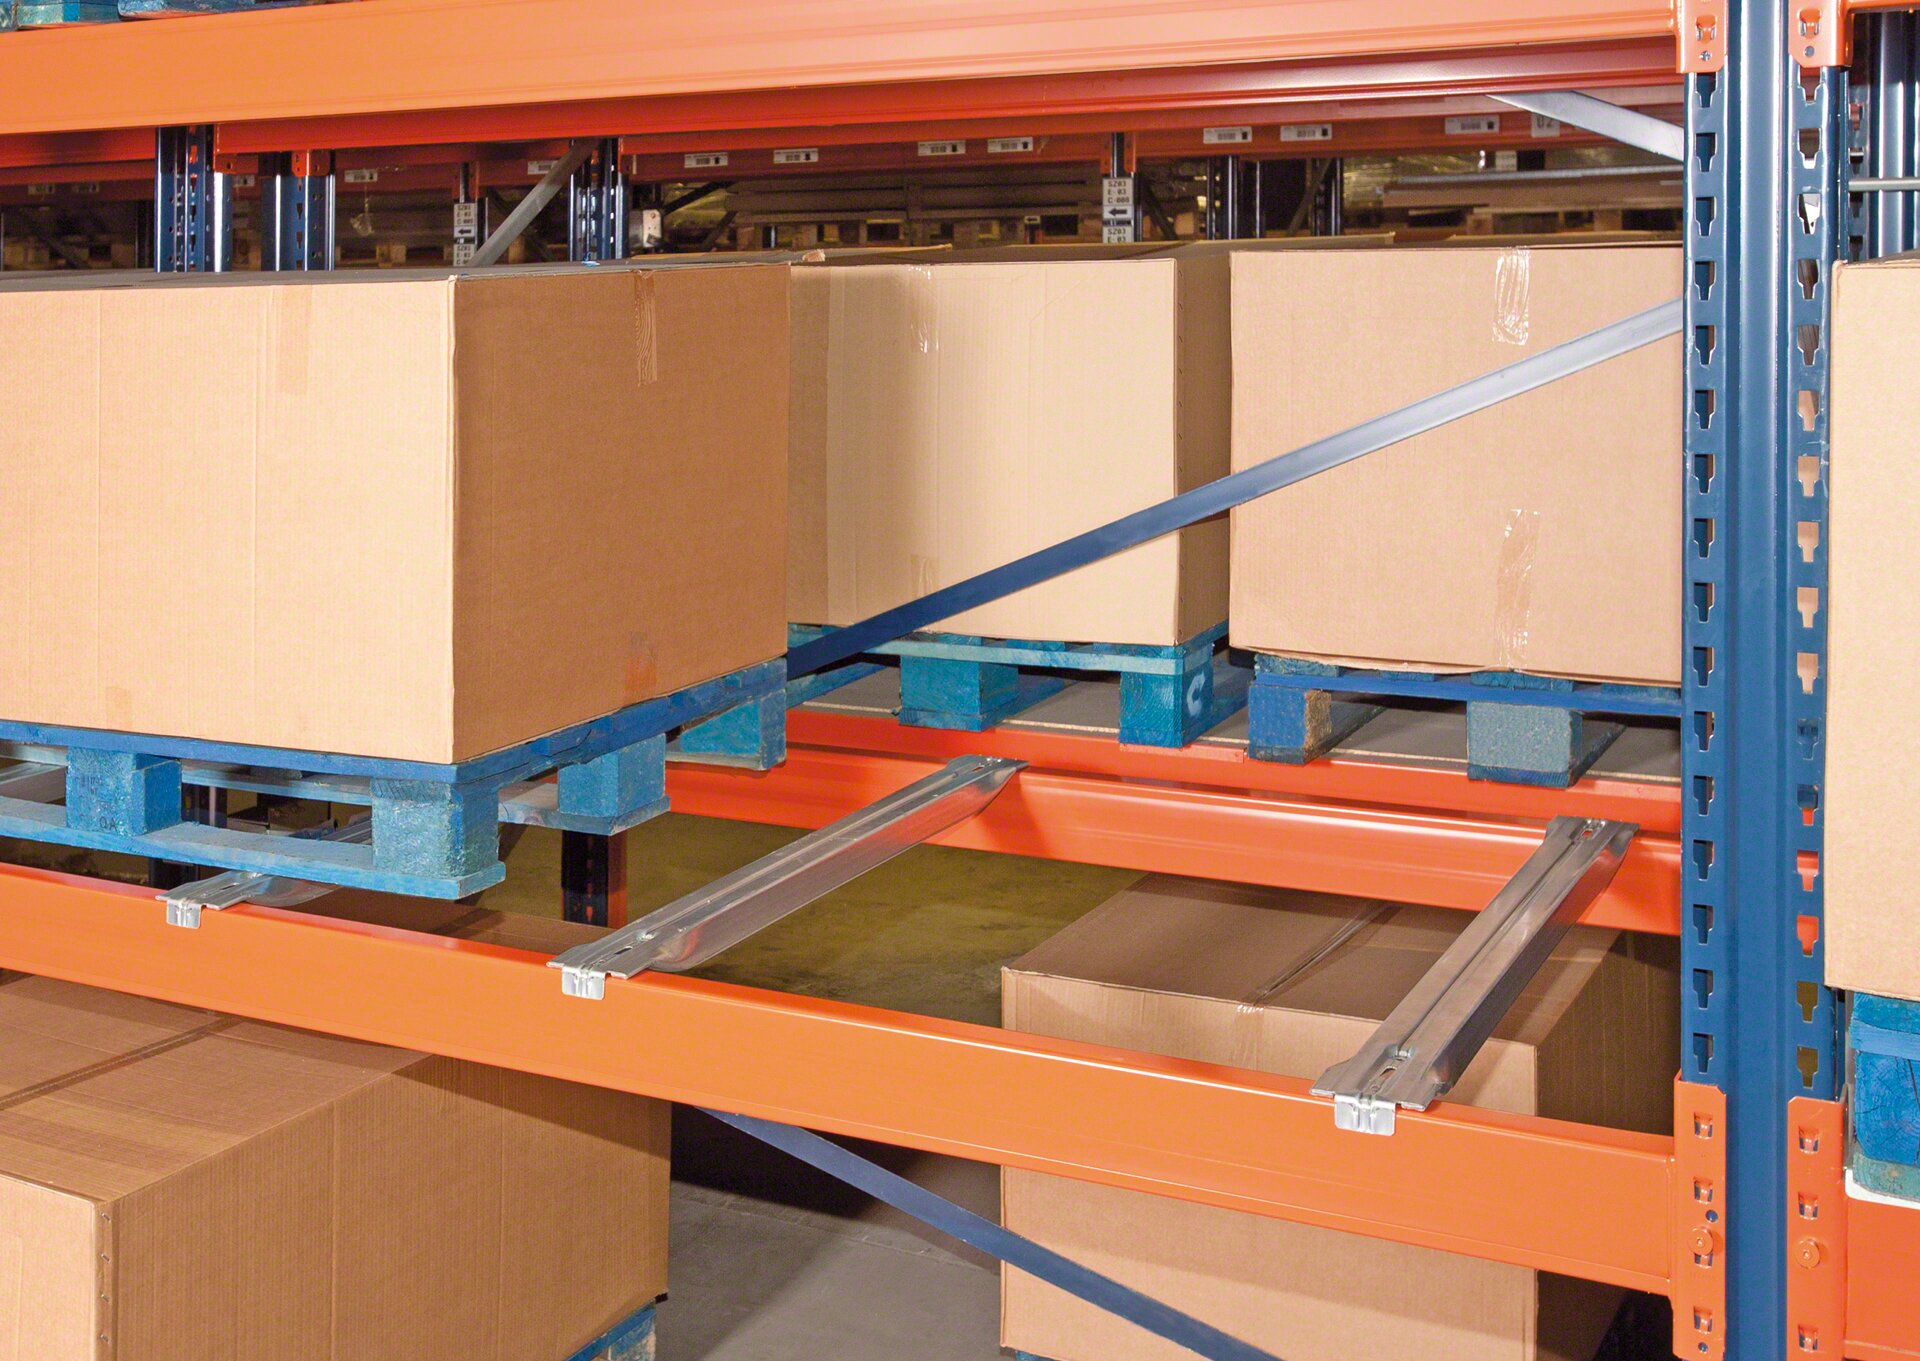 It is possible to place crossties to house pallets with the skids placed in parallel to the rack’s beam